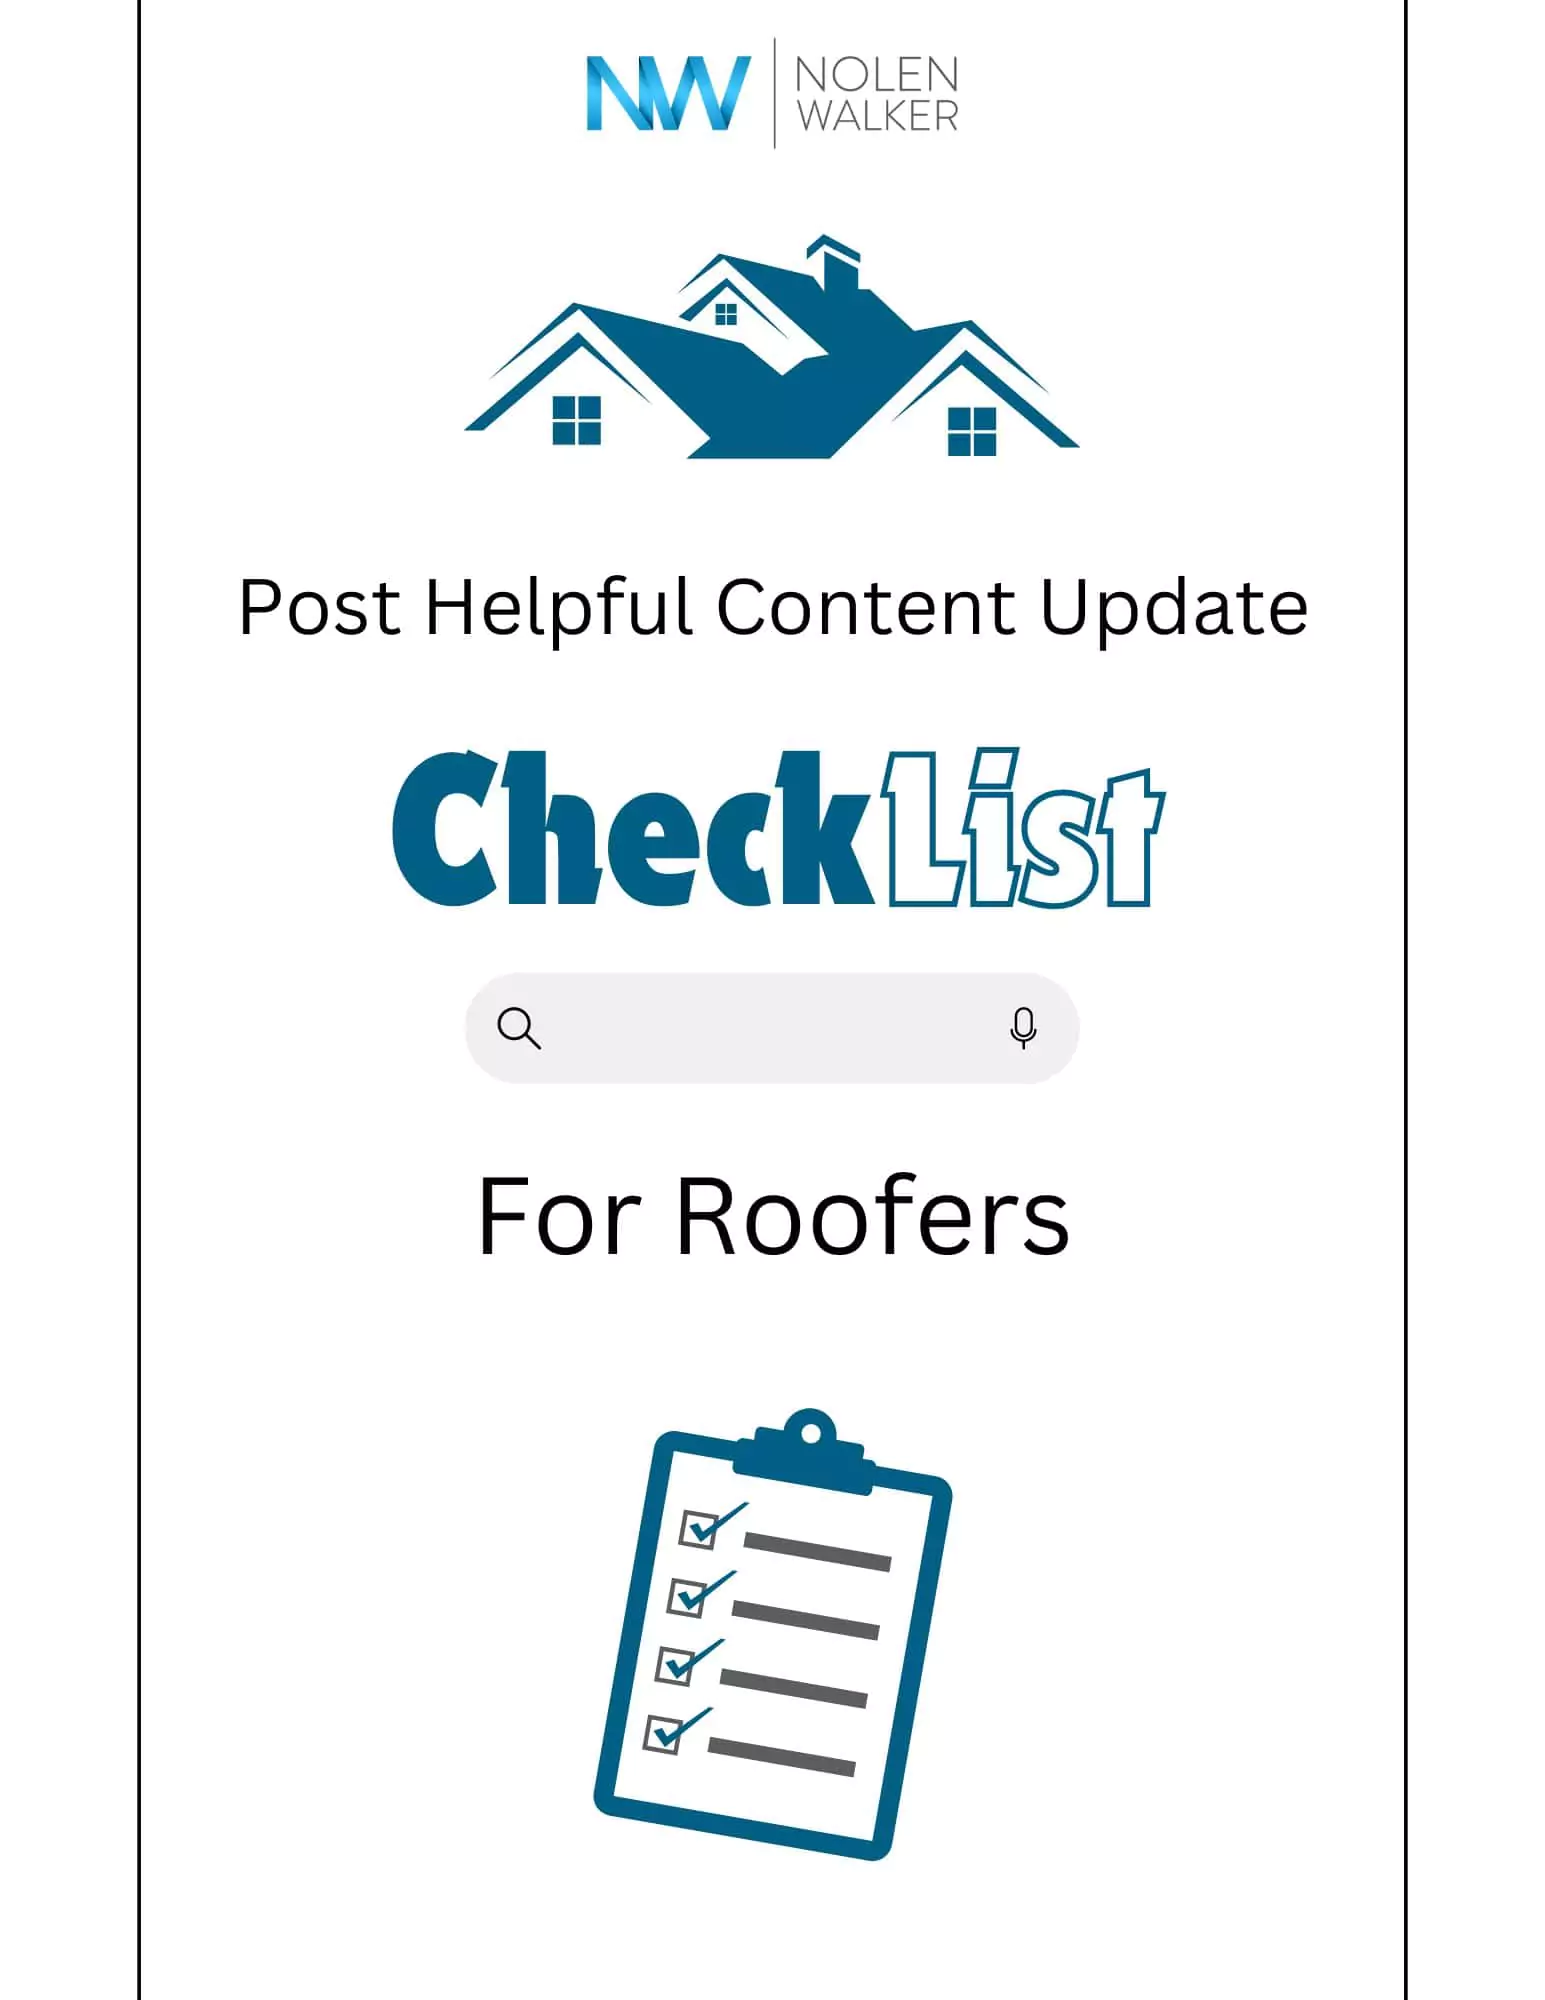 Post Helpful Content Update Checklist for Roofers